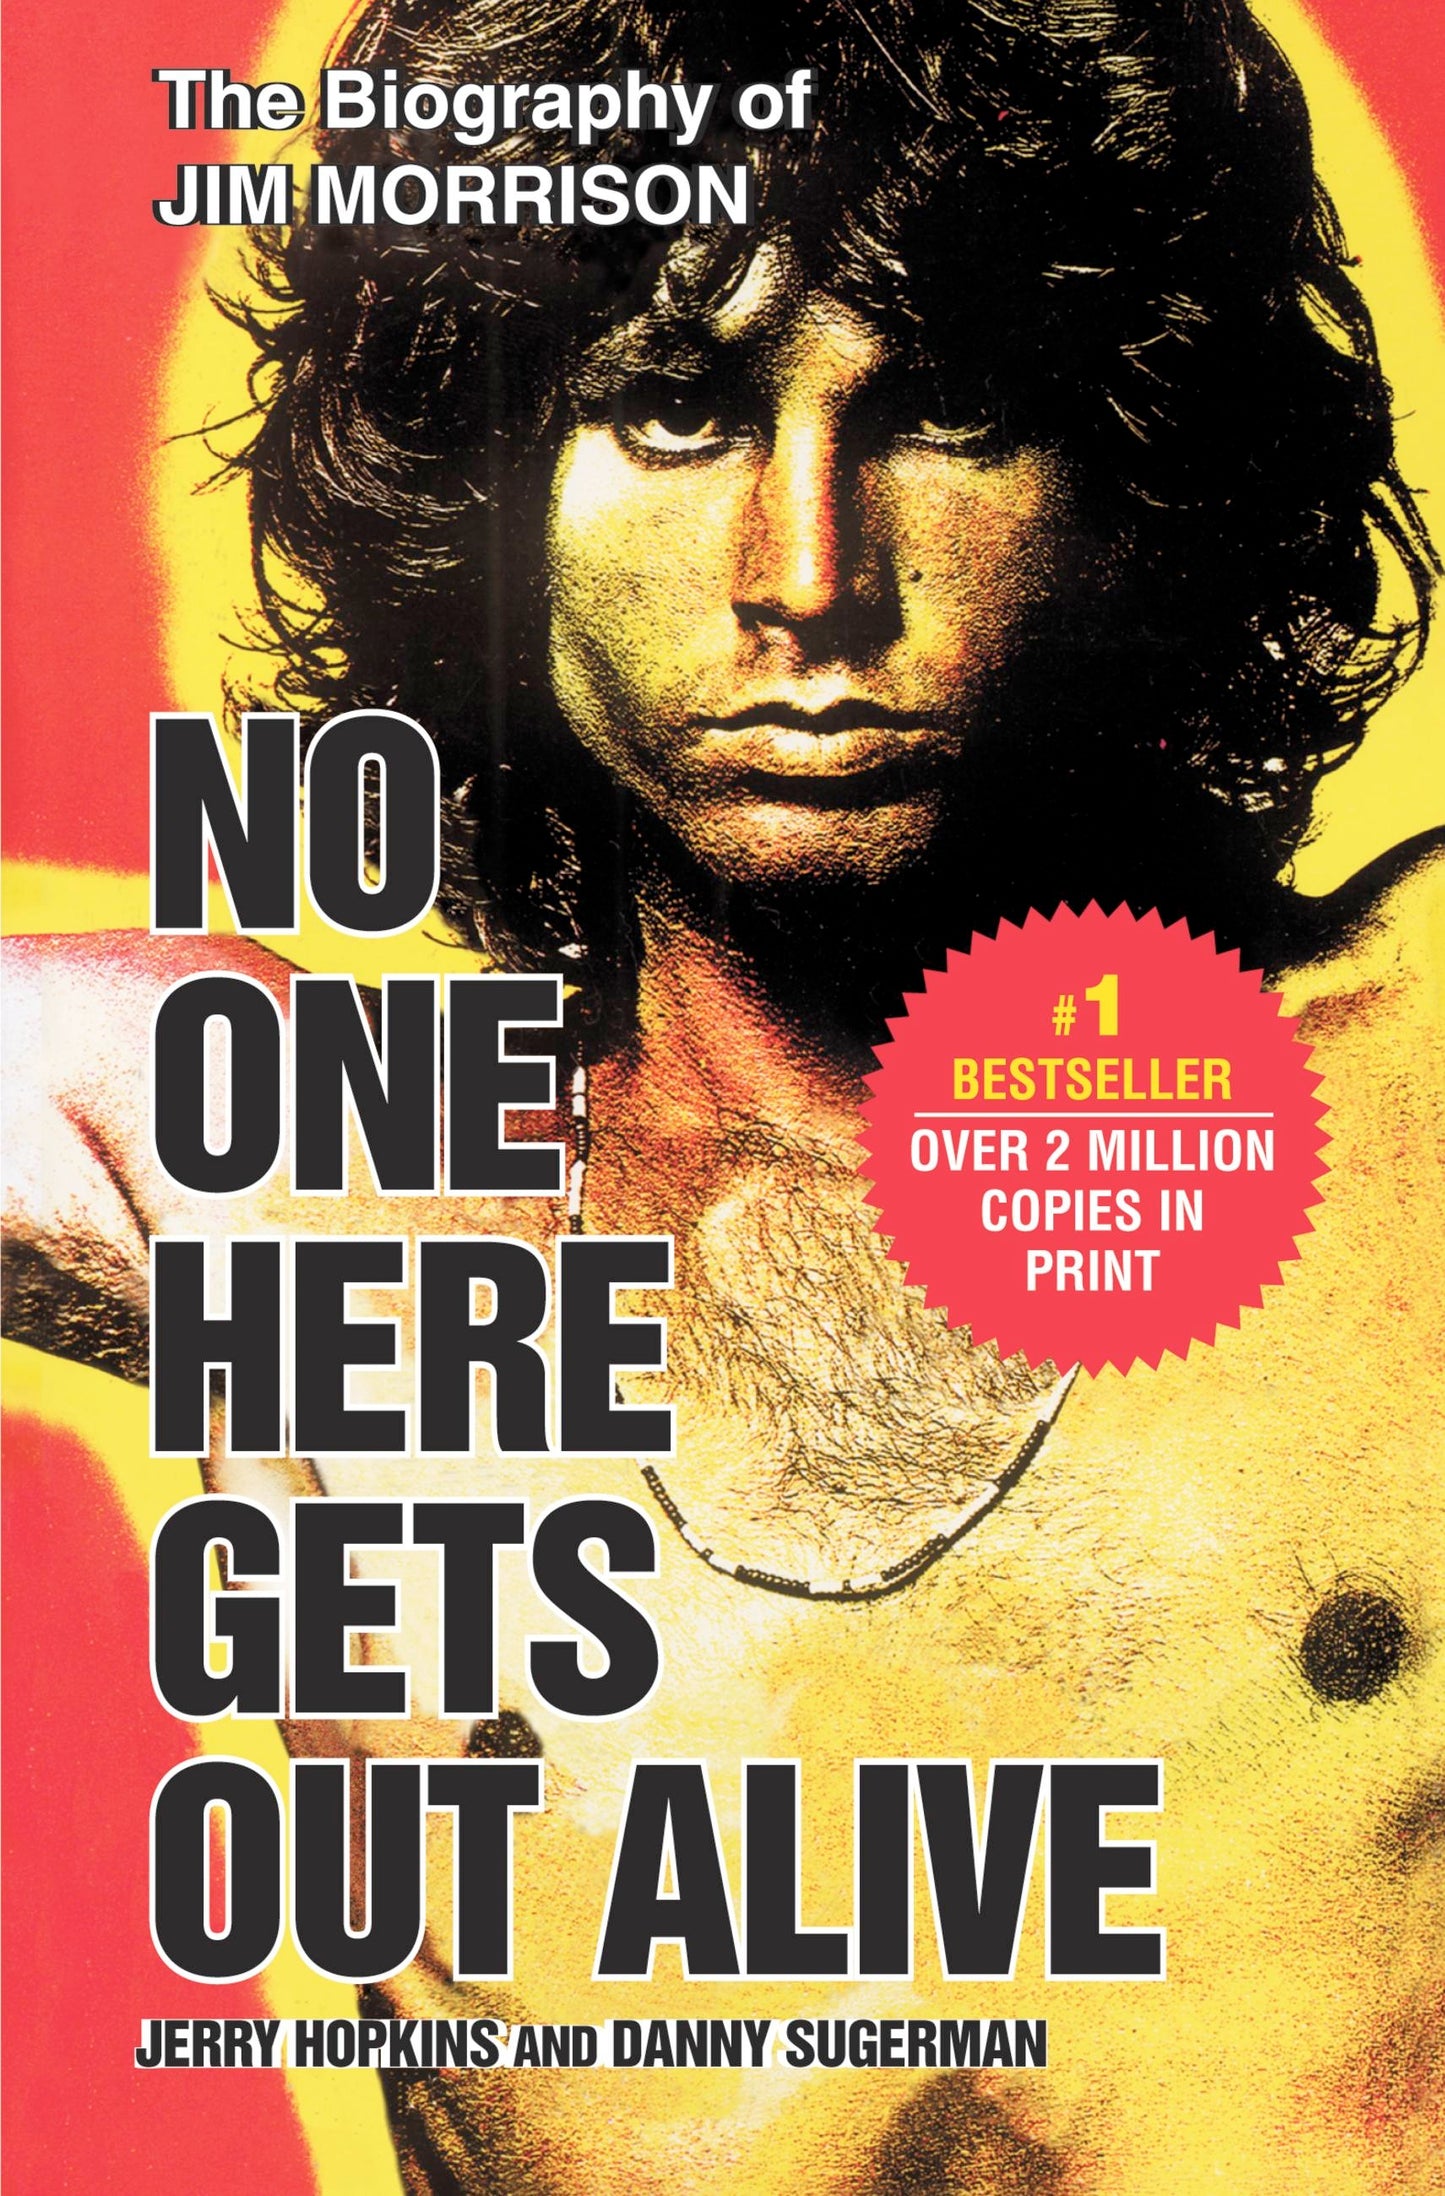 THE DOORS - JIM MORRISON - NO ONE HERE GETS OUT ALIVE - PAPERBACK - BOOK